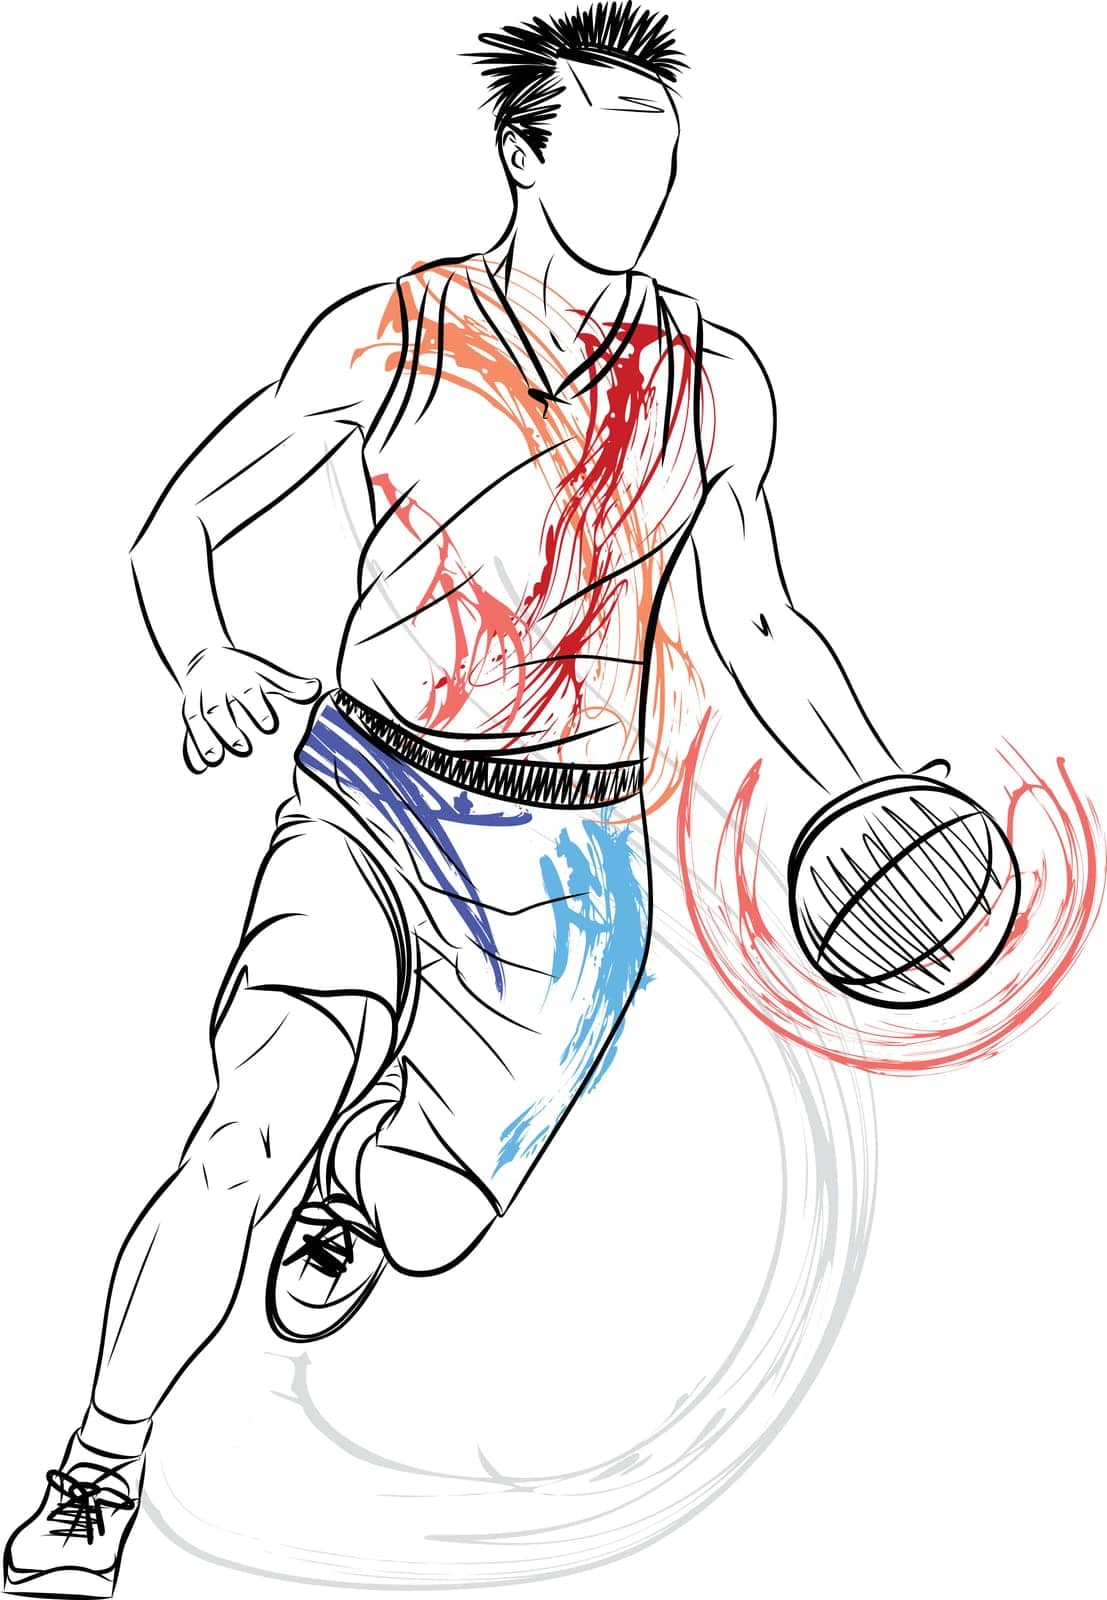 Sketch illustration of basketball player in action with ball